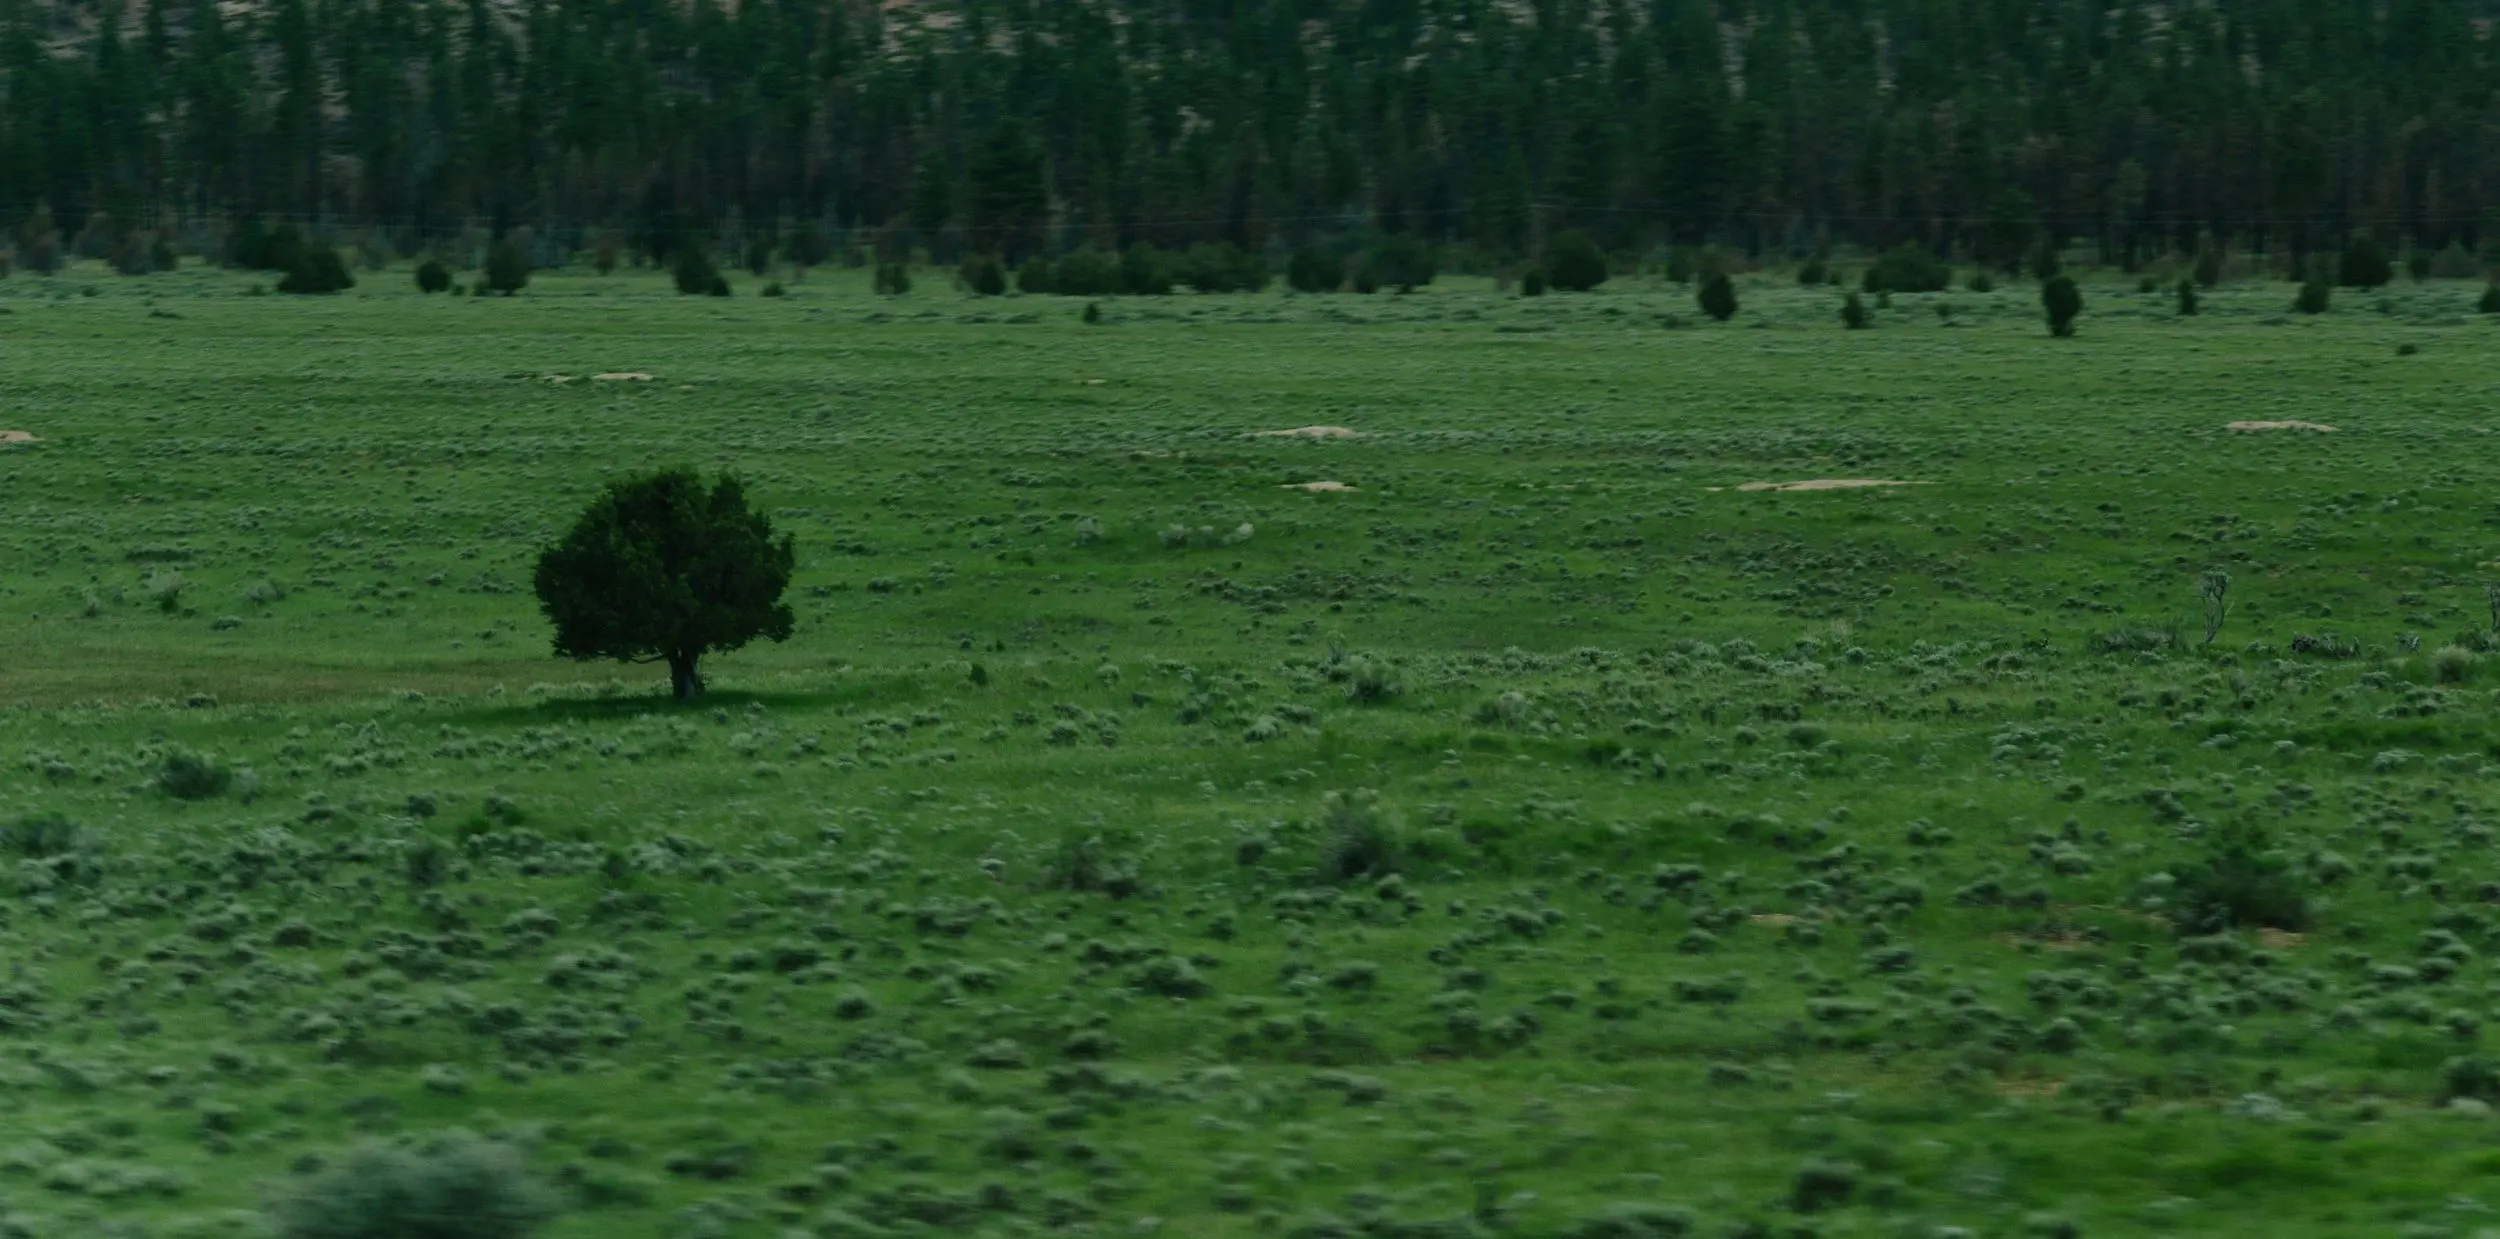 A lone tree stands in front of a forest on a green field.